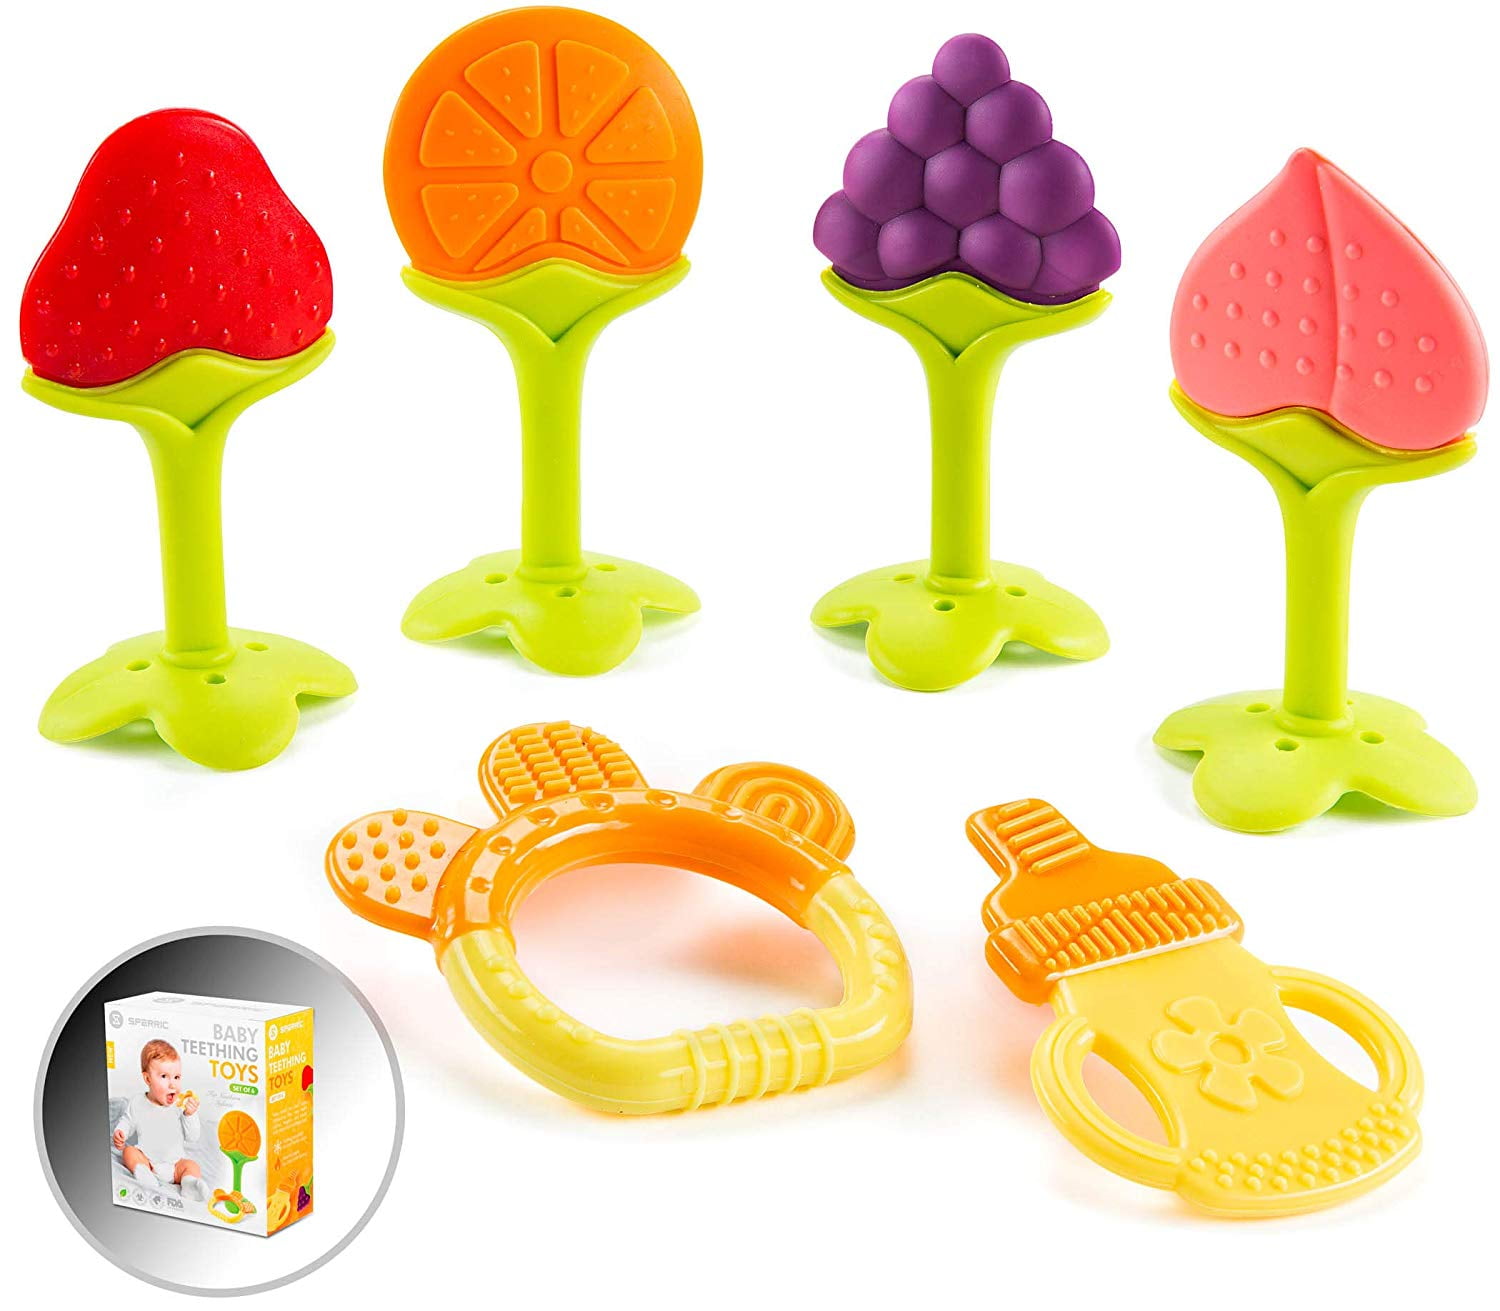 5 Pack of Cute Fruit Teethers and Baby Use BPA Free and FDA Approved for Infant Silicone Teething Toys for Boys and Girls Freezable and Flexible Safe Toddler 